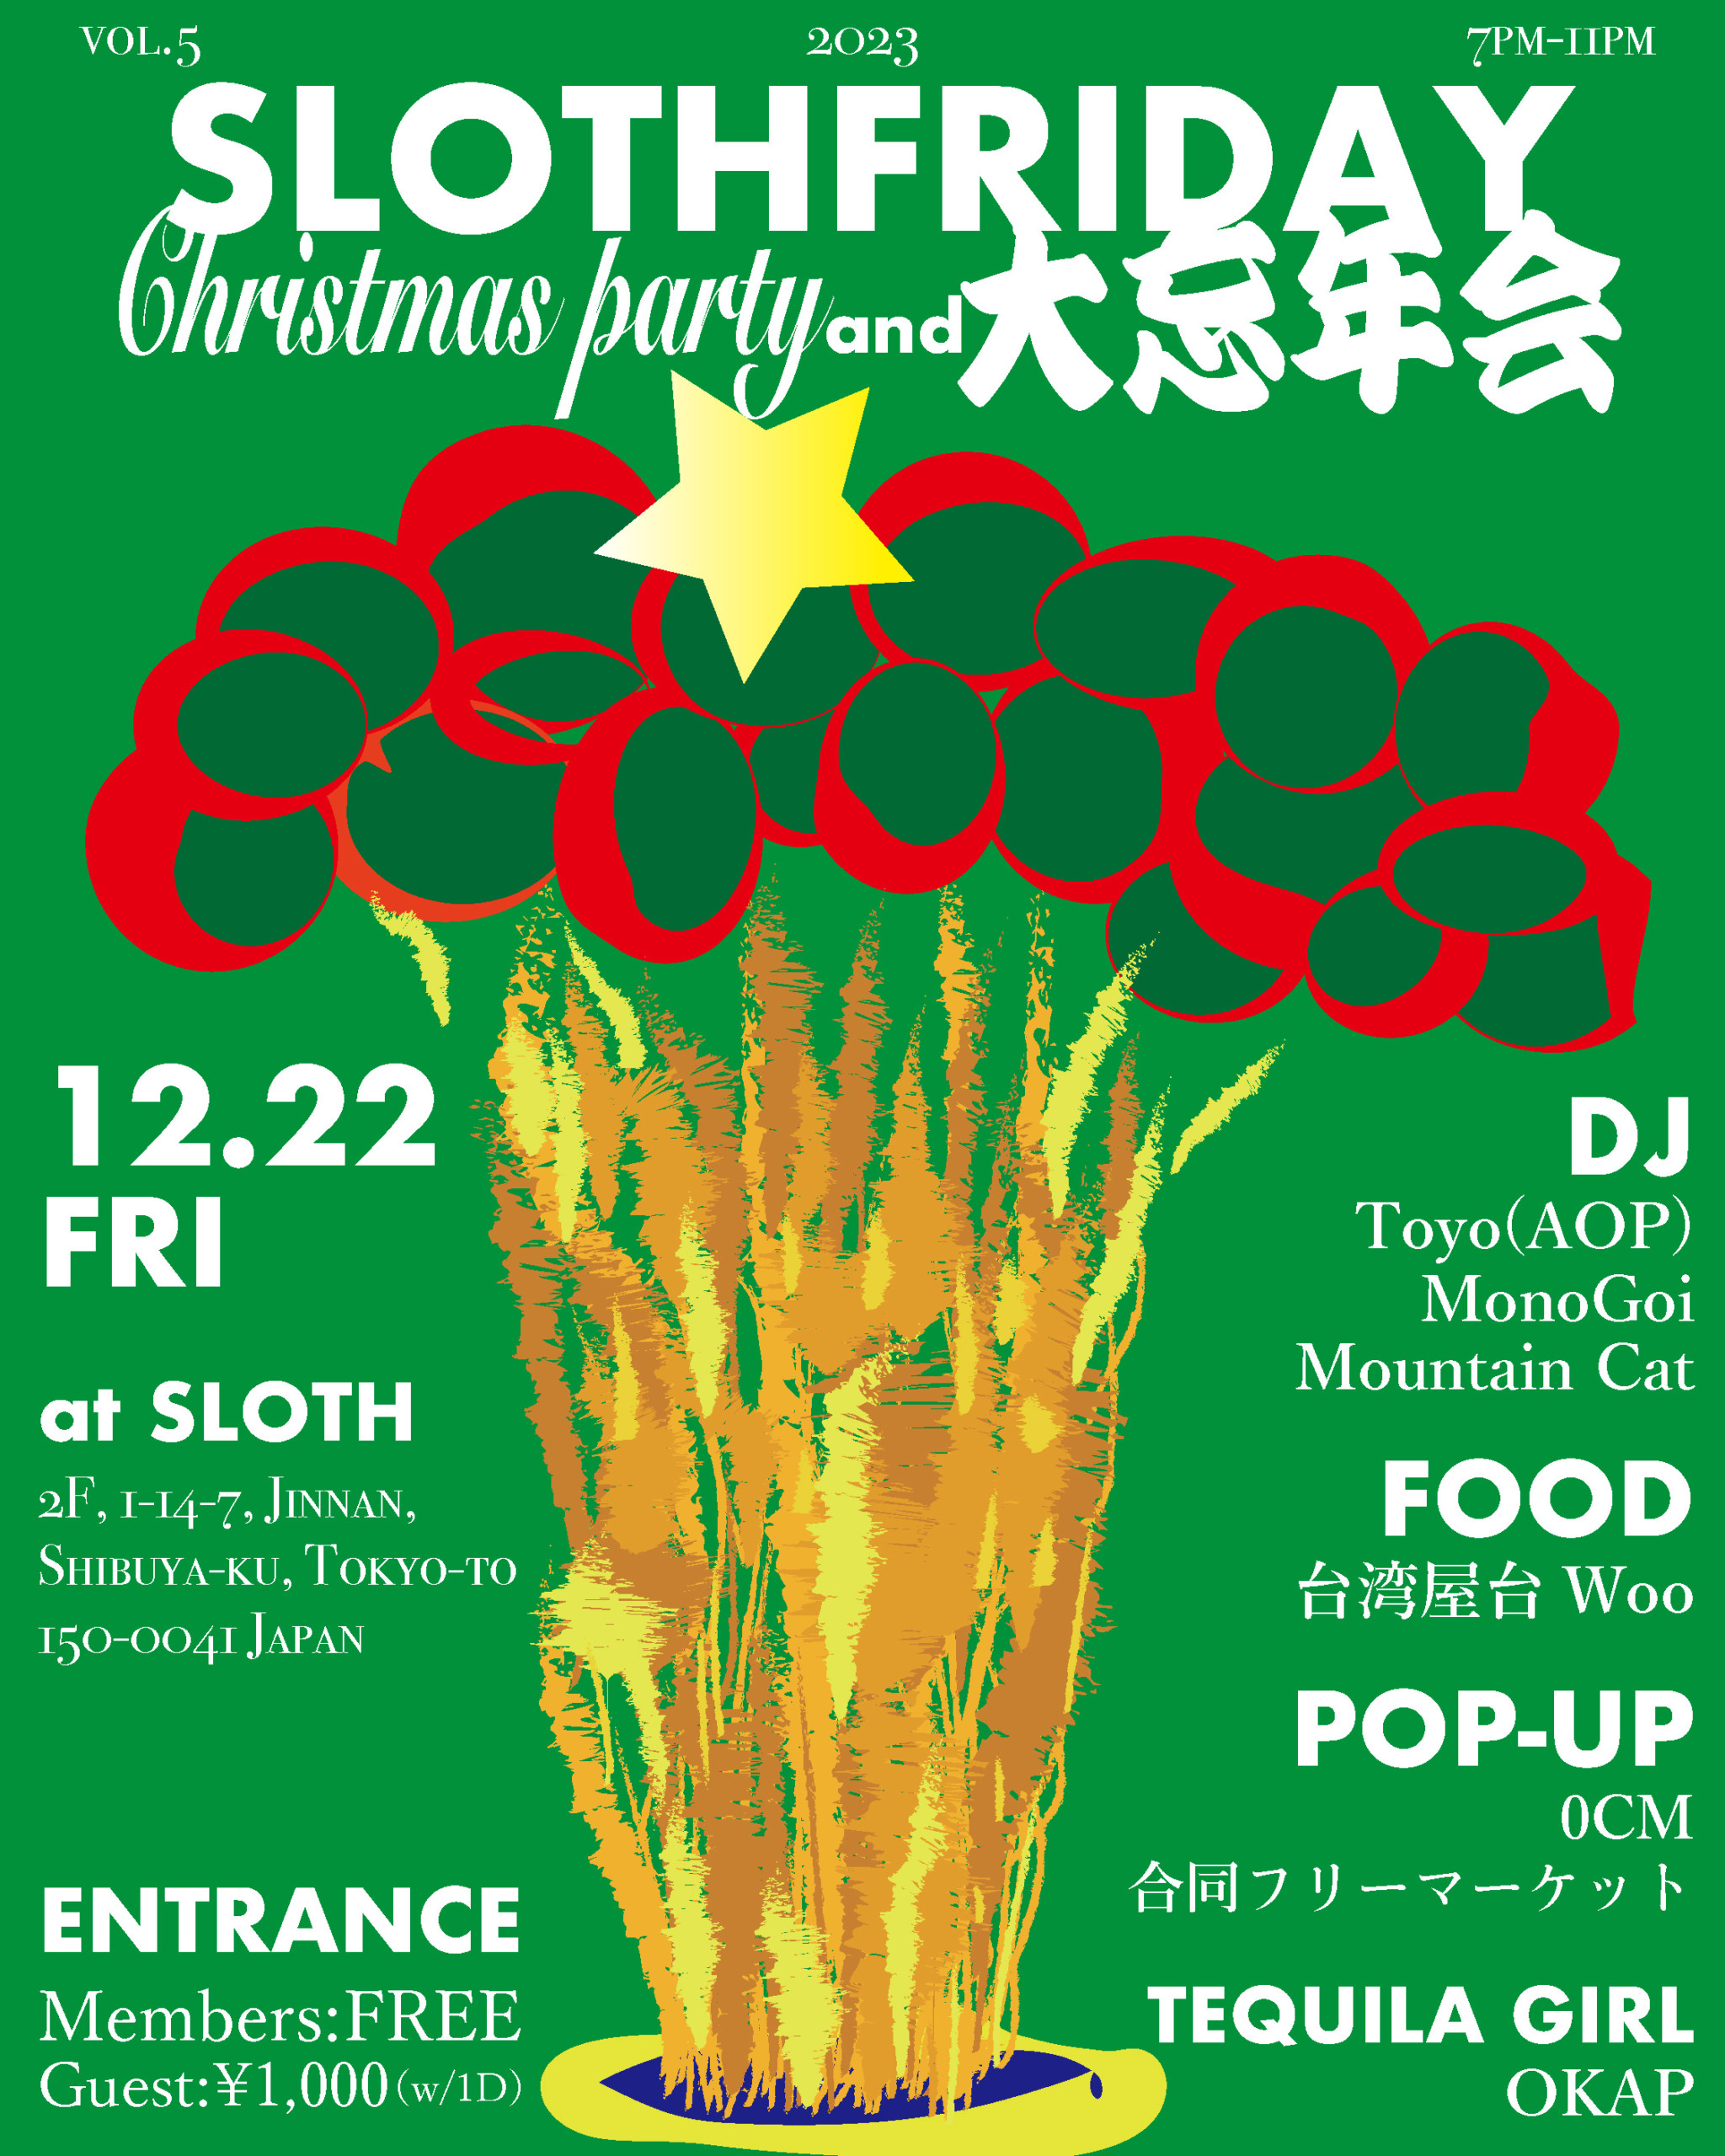 【EVENT】SLOTH FRIDAY vol.5 Christmas Party and 大忘年会